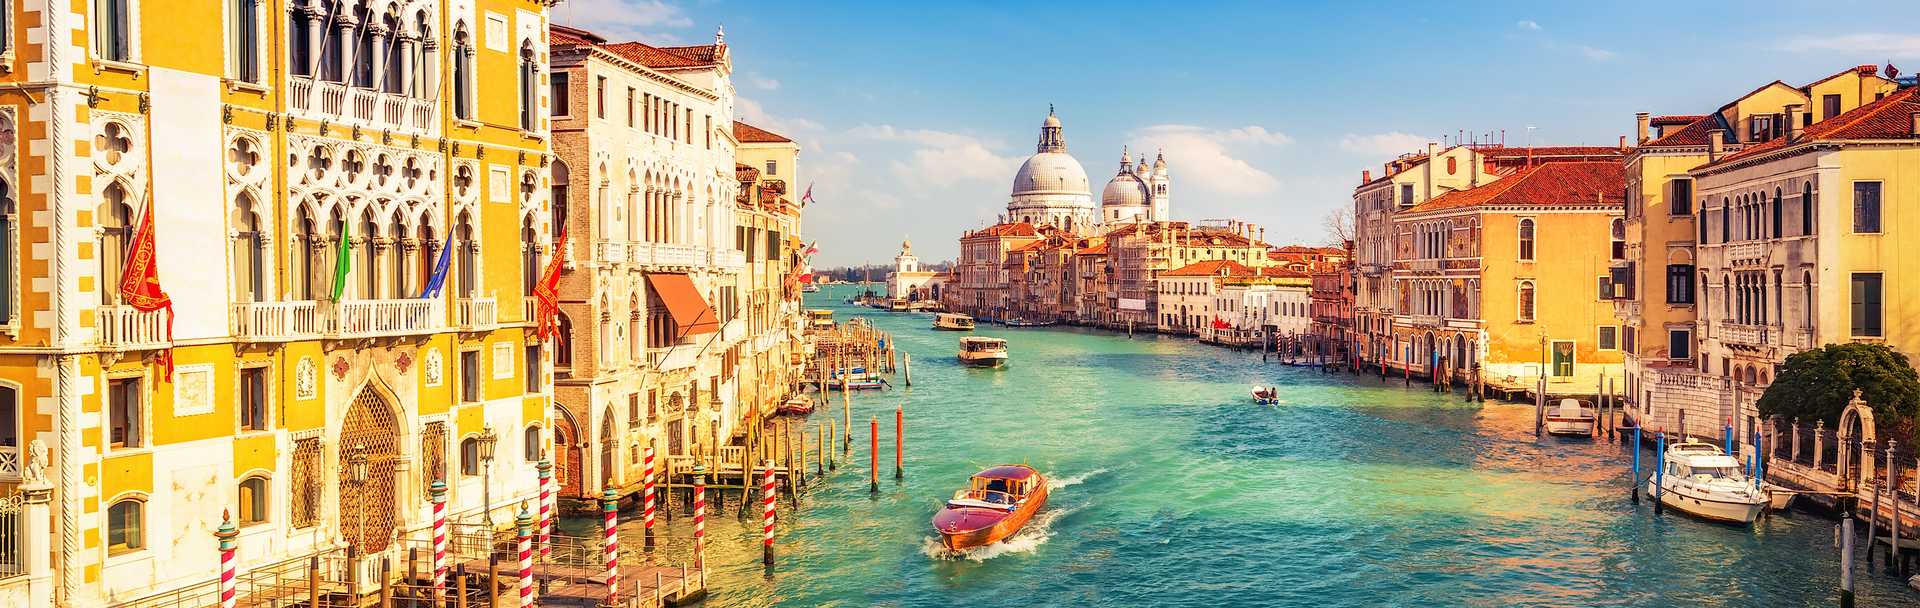 venice tour package for couple